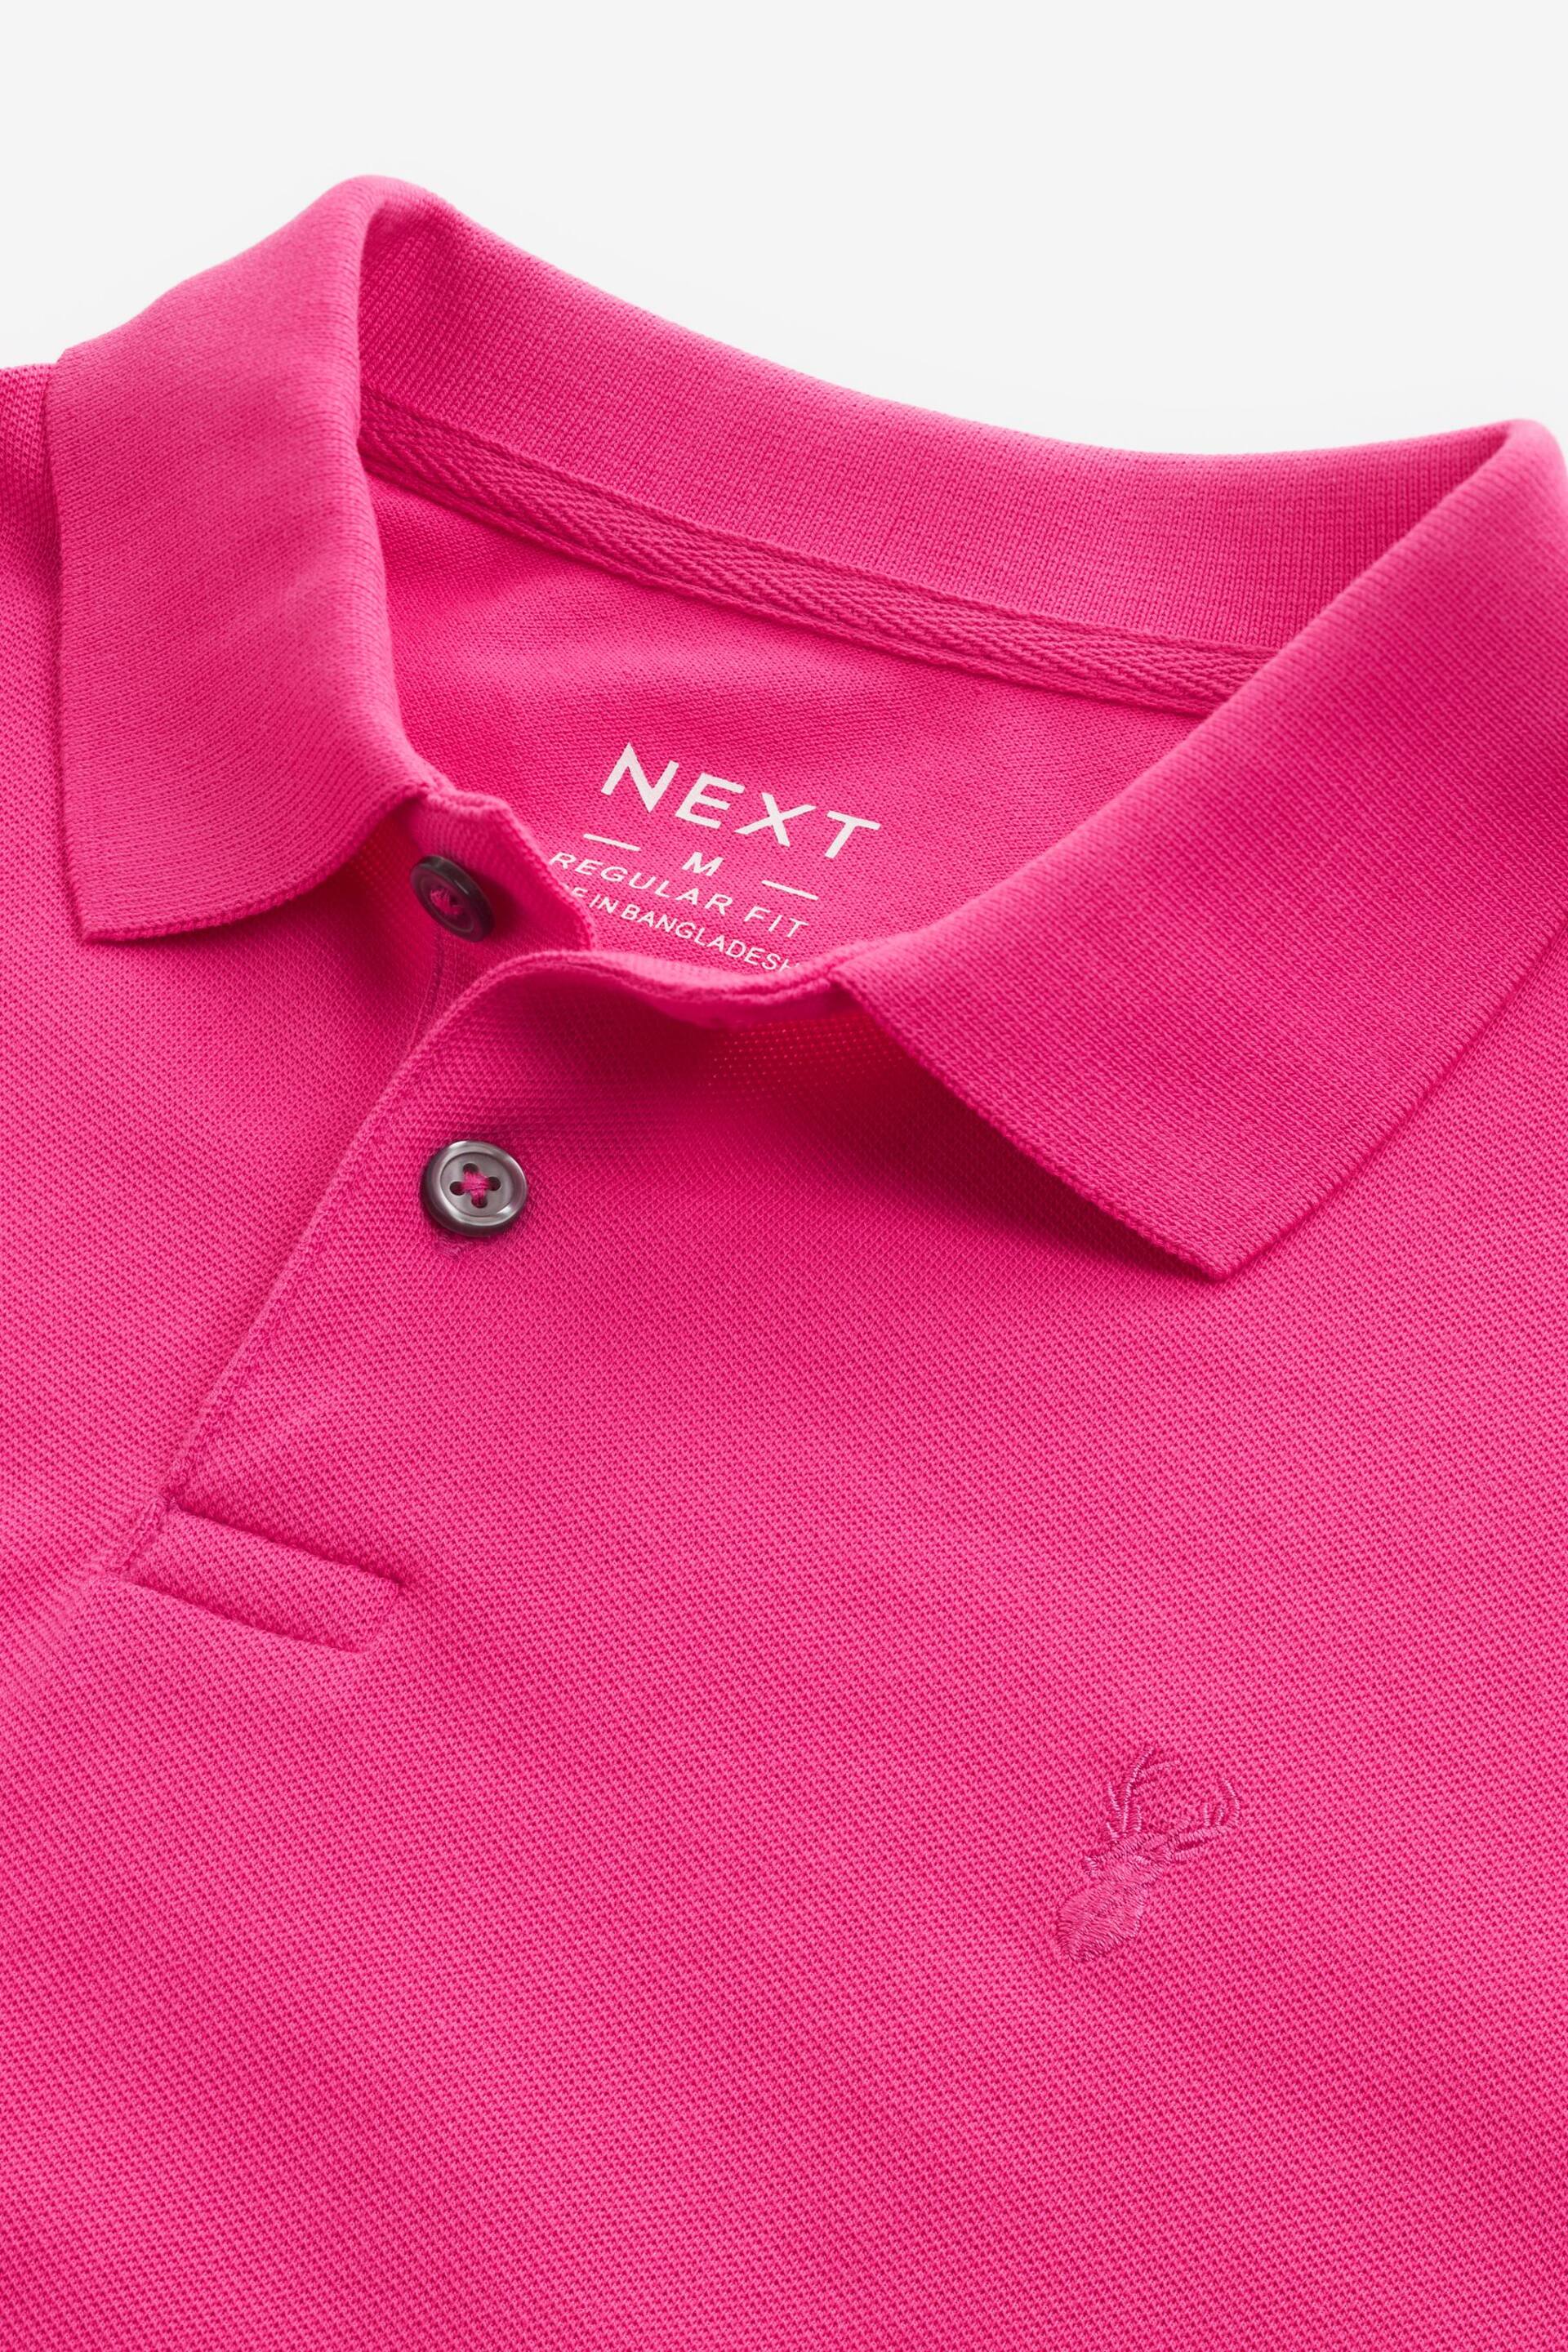 Bright Pink Regular Fit Short Sleeve Pique Polo Shirt - Image 6 of 7